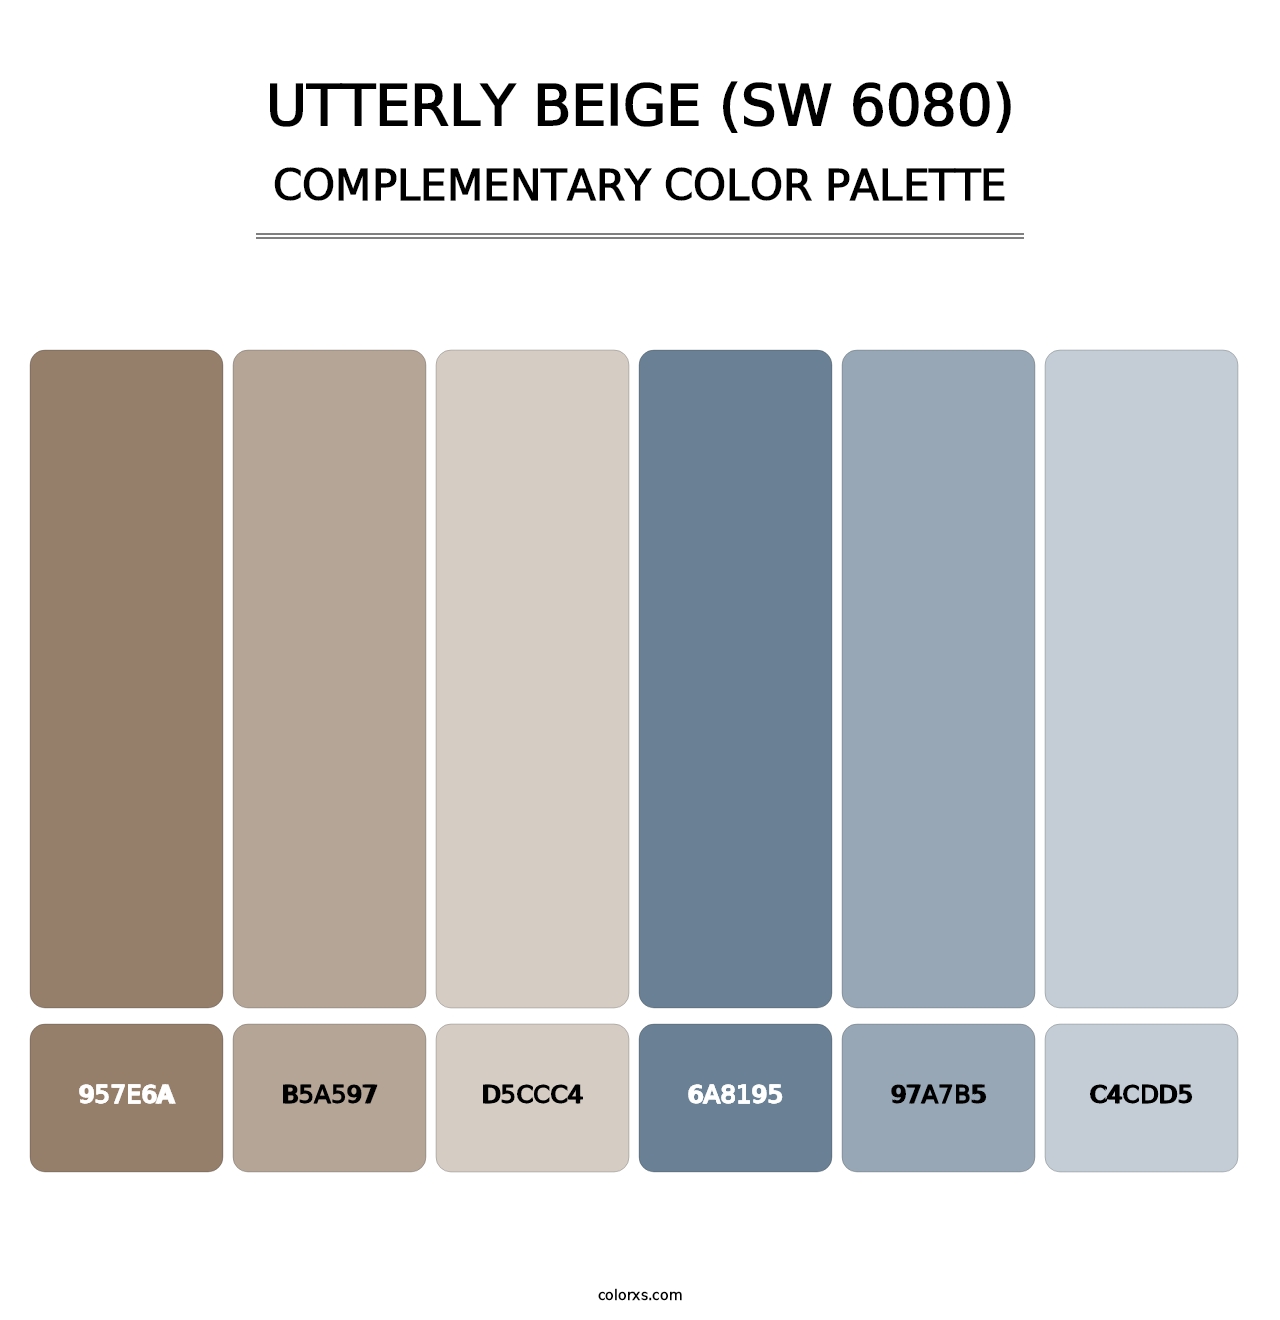 Utterly Beige (SW 6080) - Complementary Color Palette